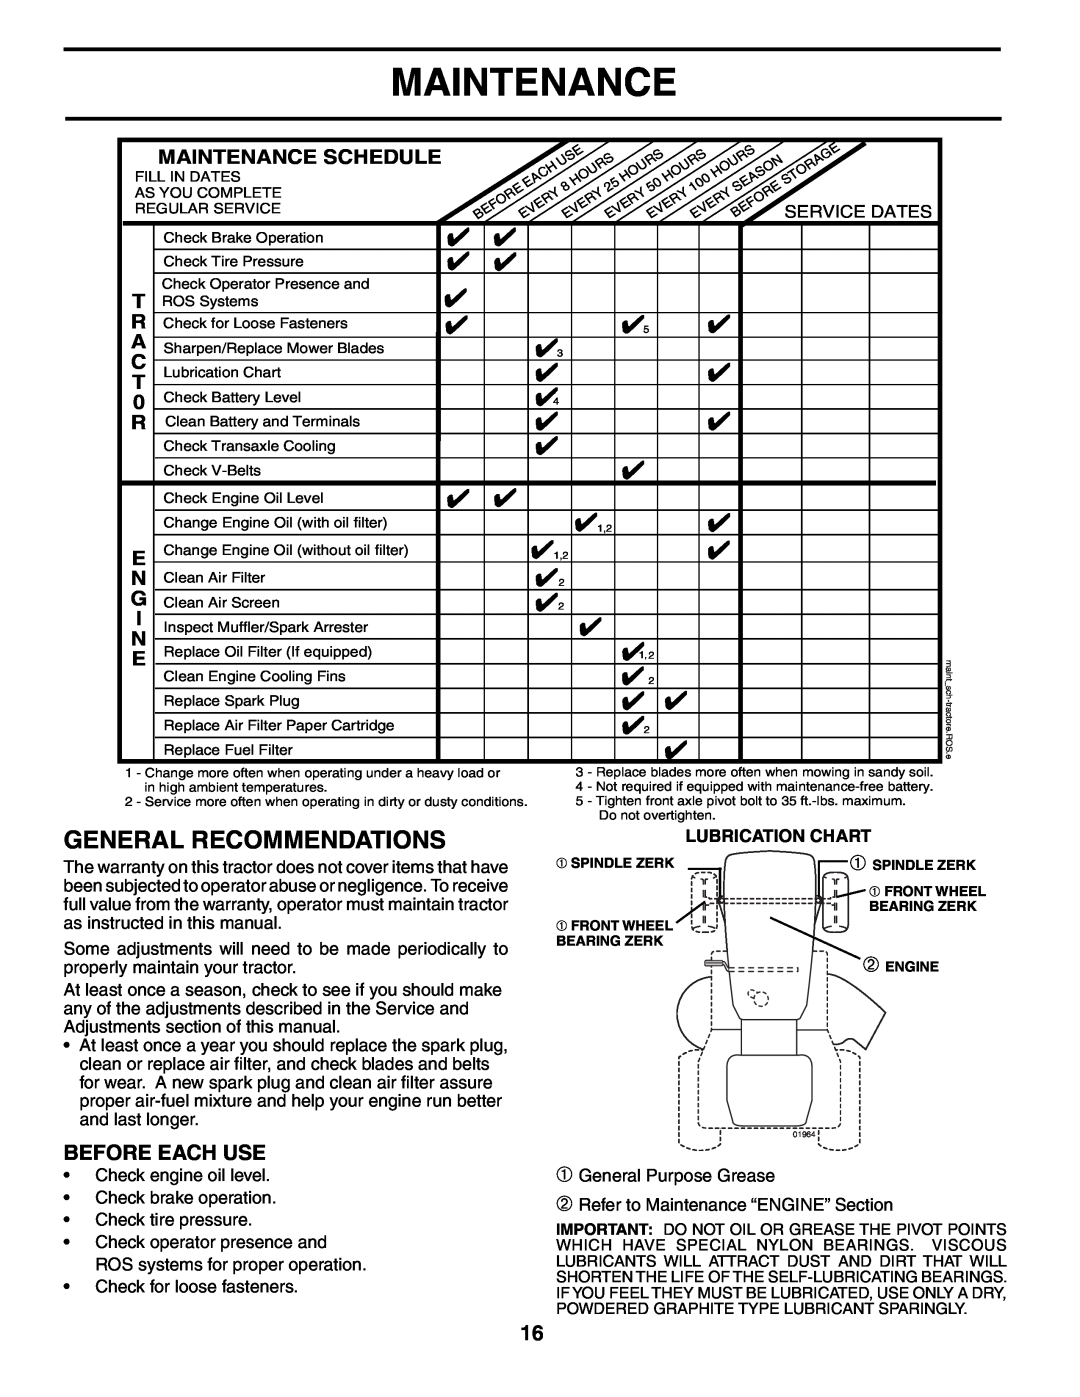 Poulan PD24PH42ST manual General Recommendations, Before Each Use, Maintenance Schedule 